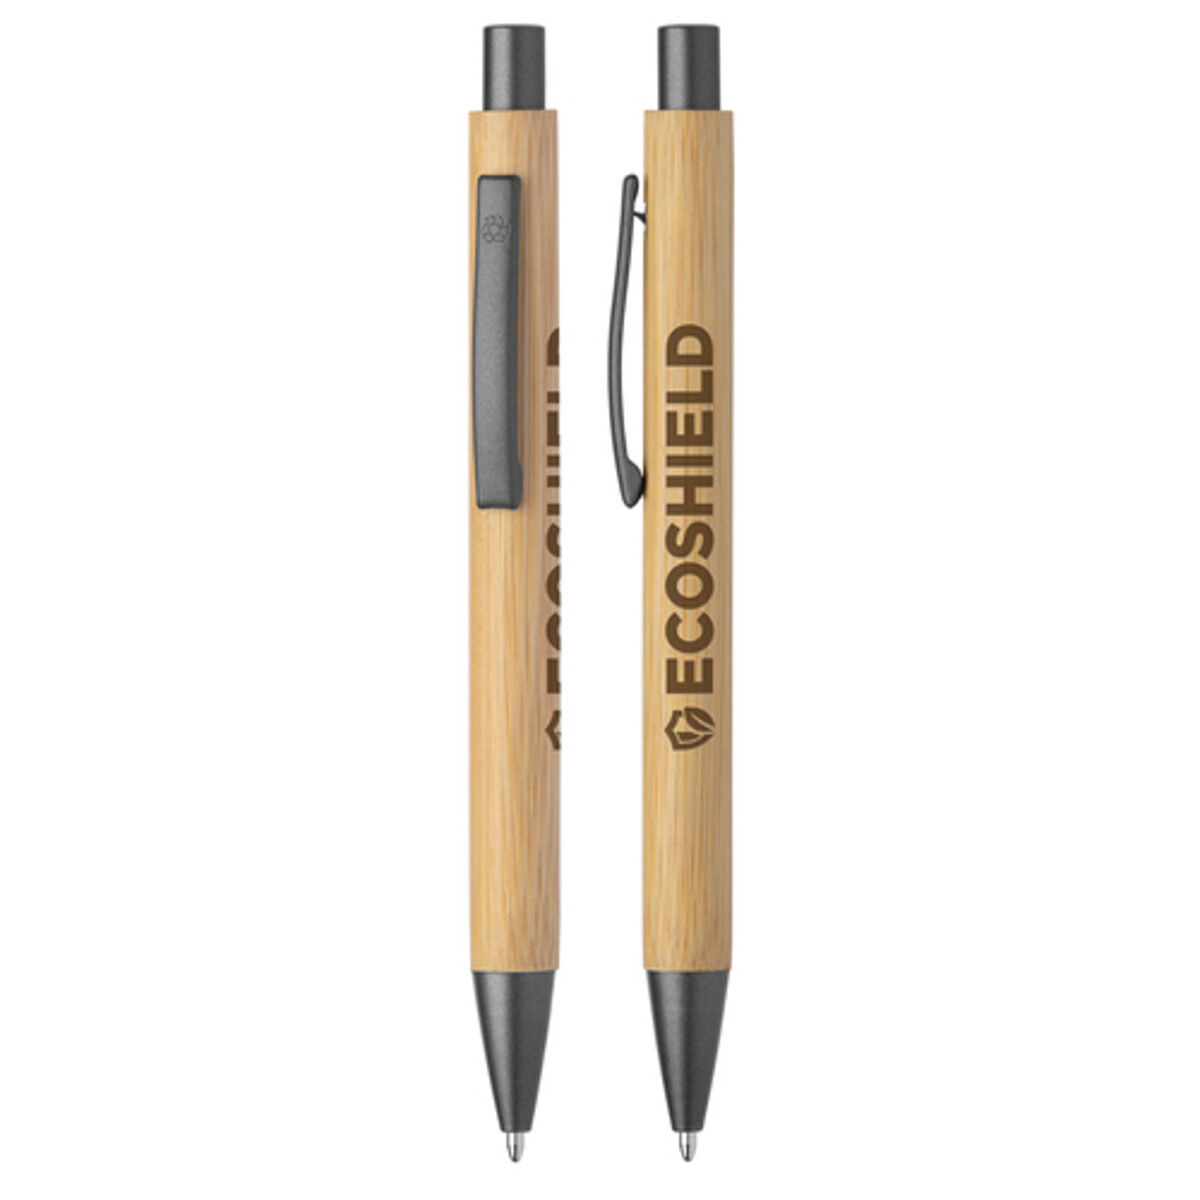 Bambowie Bamboo Pen and Pencil Set (pens)